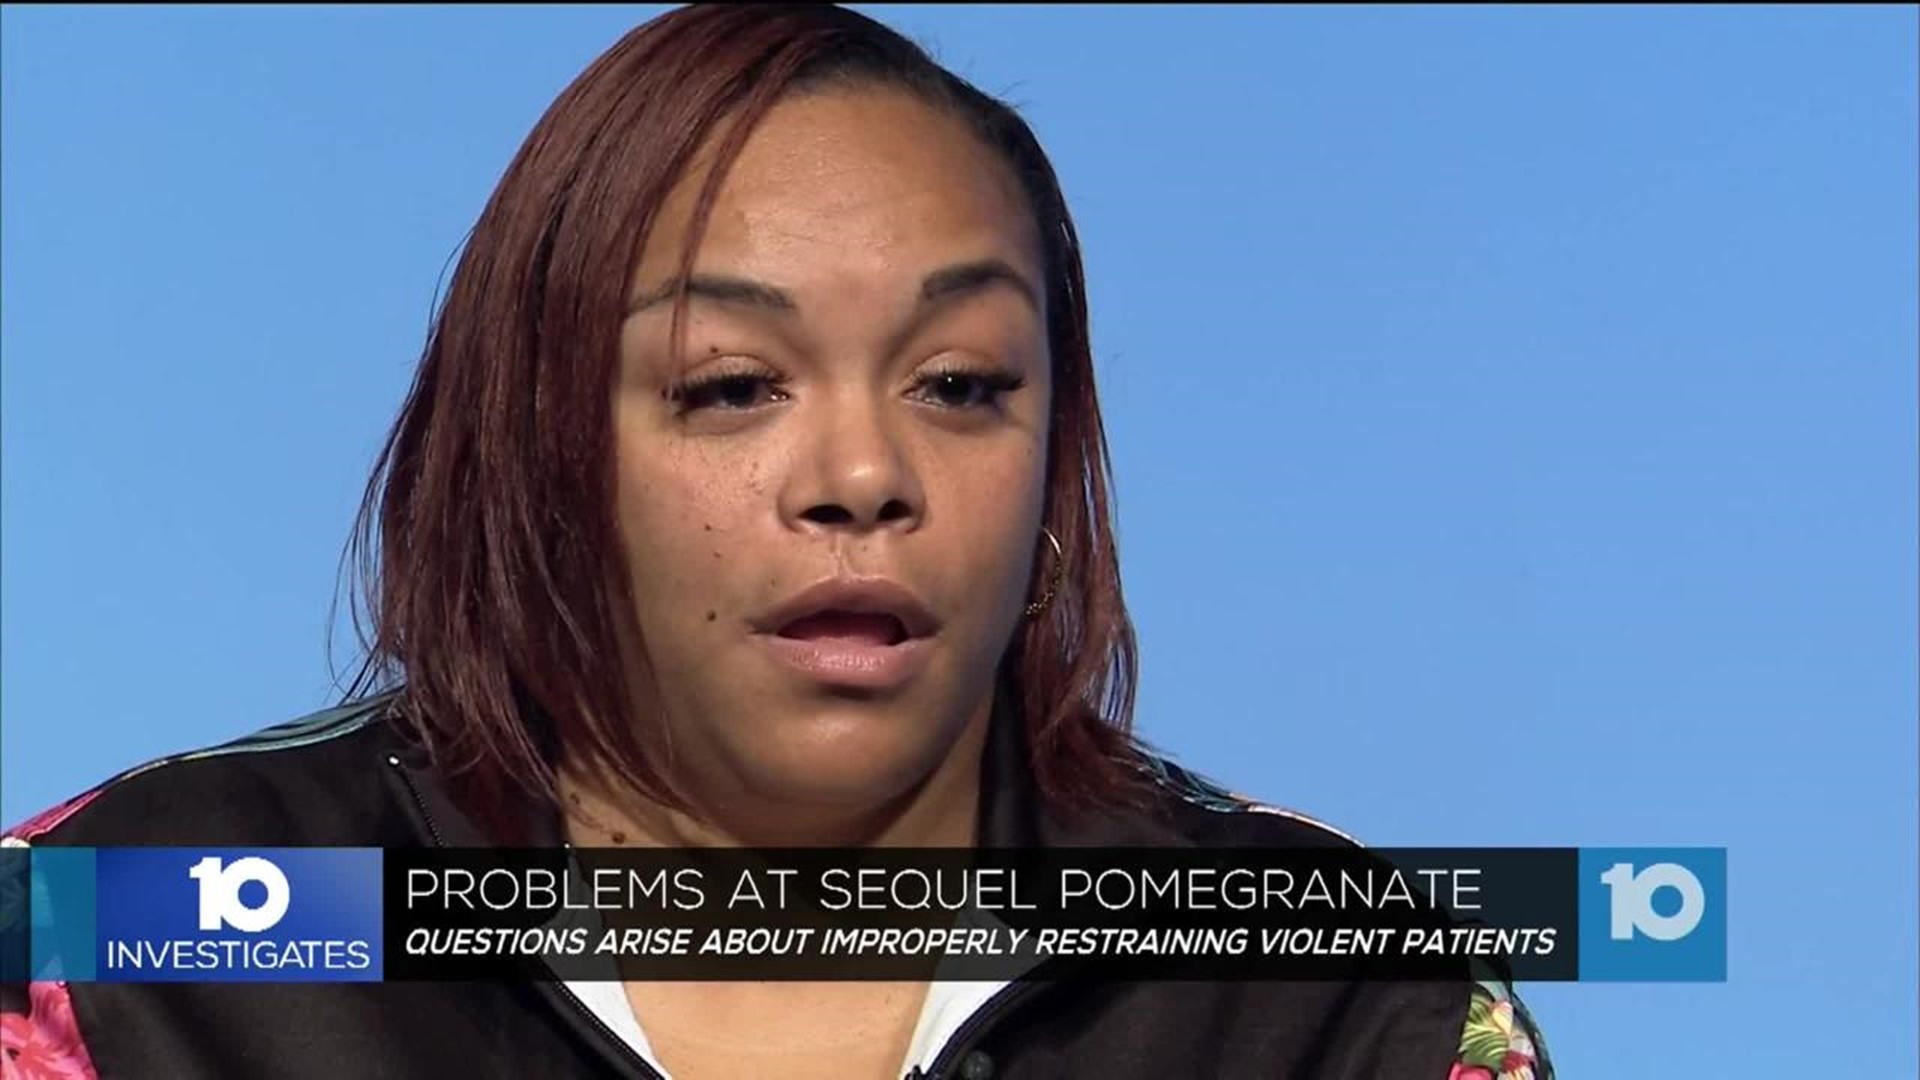 Employee says she was fired after improper restraint of teen at Sequel Pomegranate